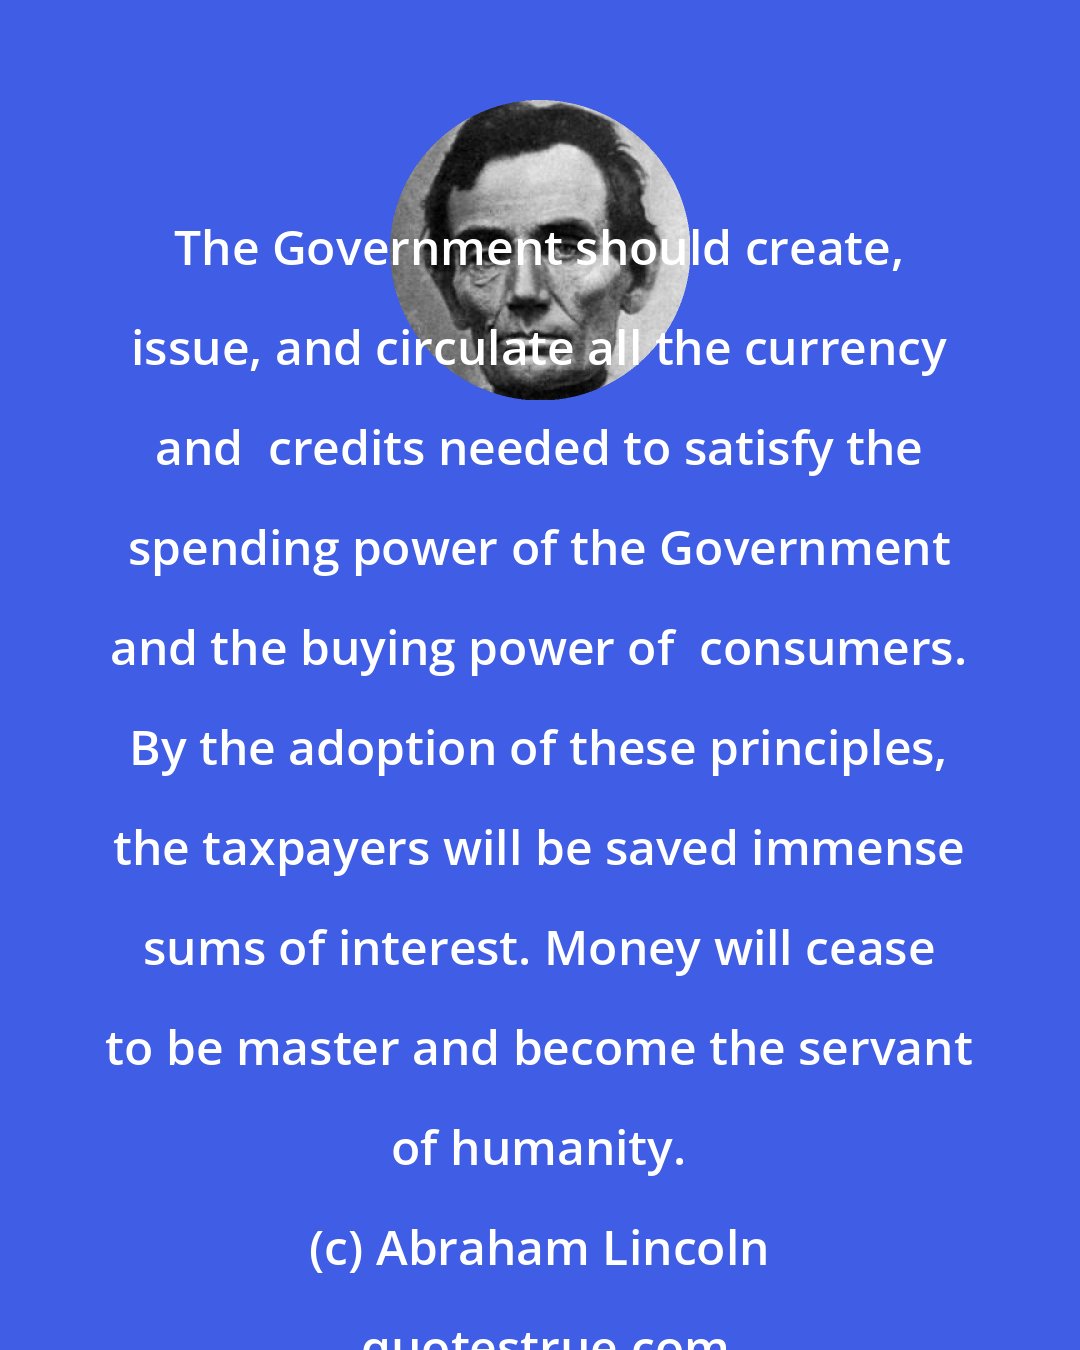 Abraham Lincoln: The Government should create, issue, and circulate all the currency and  credits needed to satisfy the spending power of the Government and the buying power of  consumers. By the adoption of these principles, the taxpayers will be saved immense sums of interest. Money will cease to be master and become the servant of humanity.